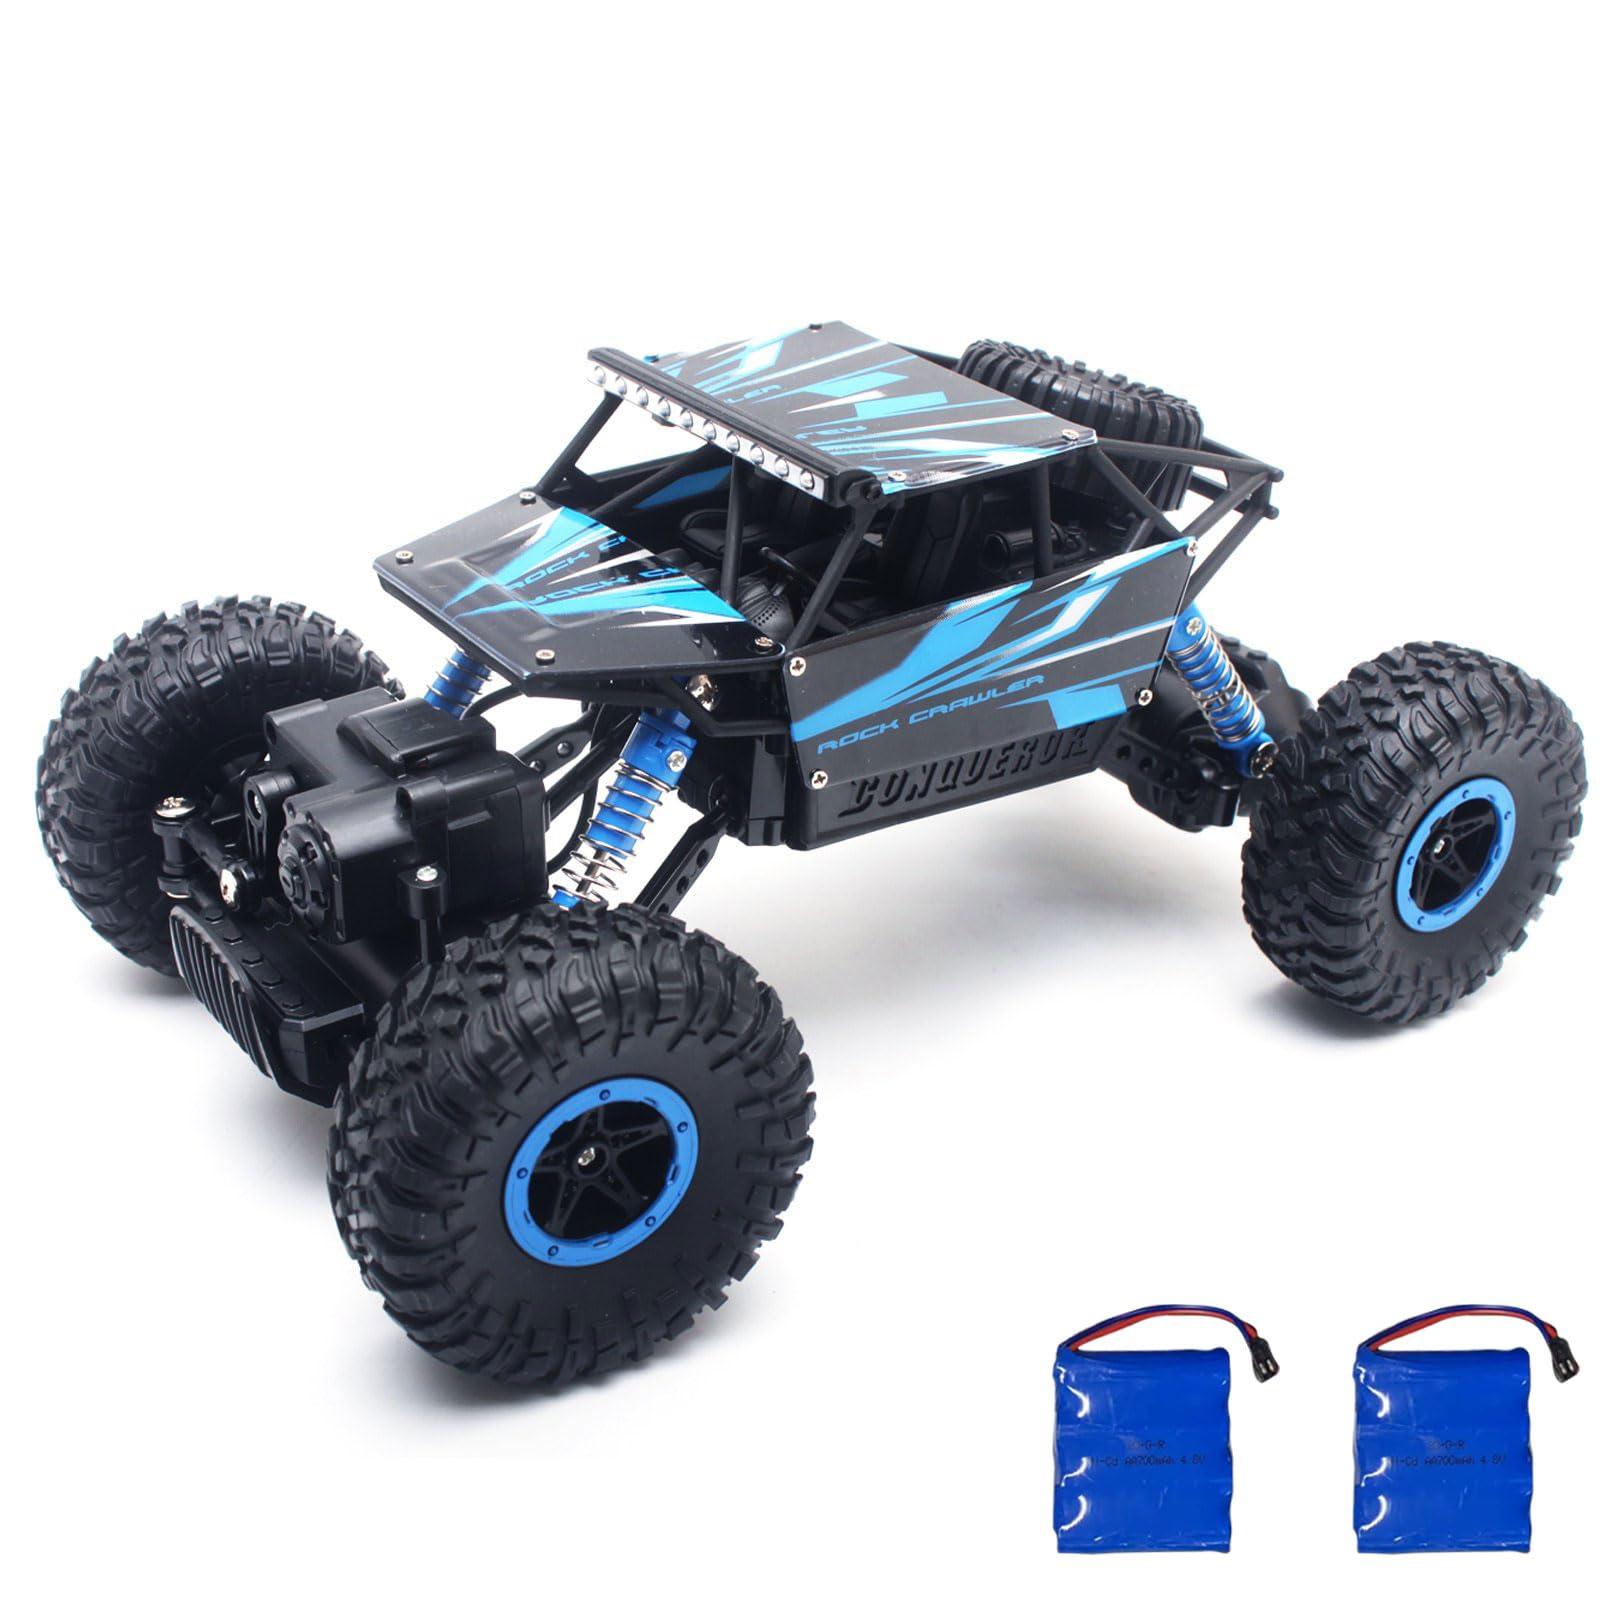 Crawler Remote Control Car: Choosing the Right Model for Your Needs